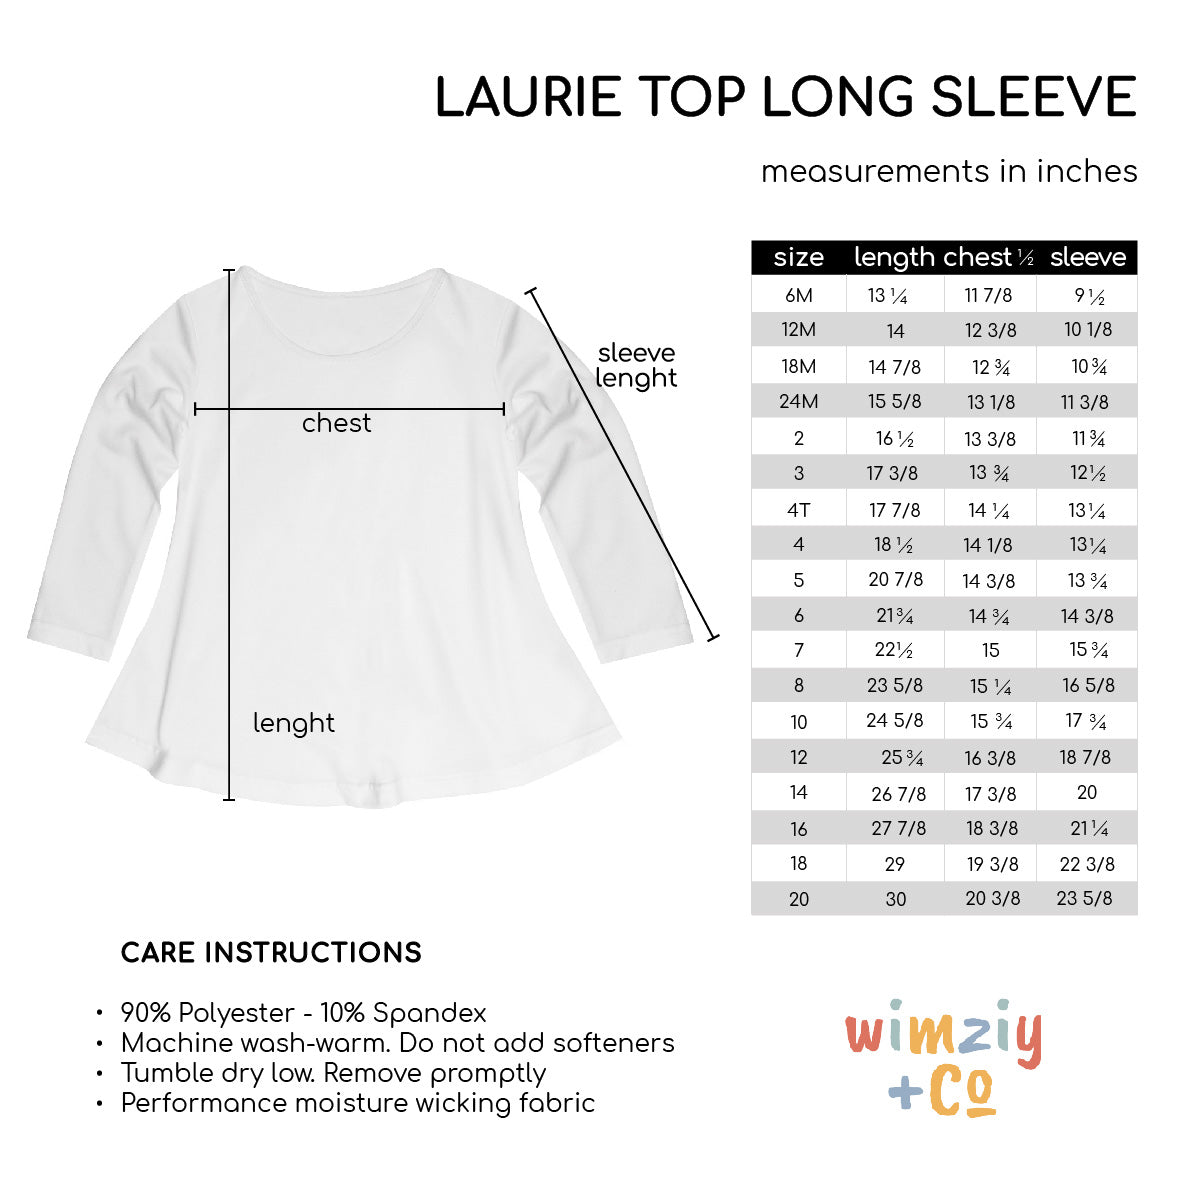 Future Scientist Black Long Sleeve Laurie Top - Wimziy&Co.